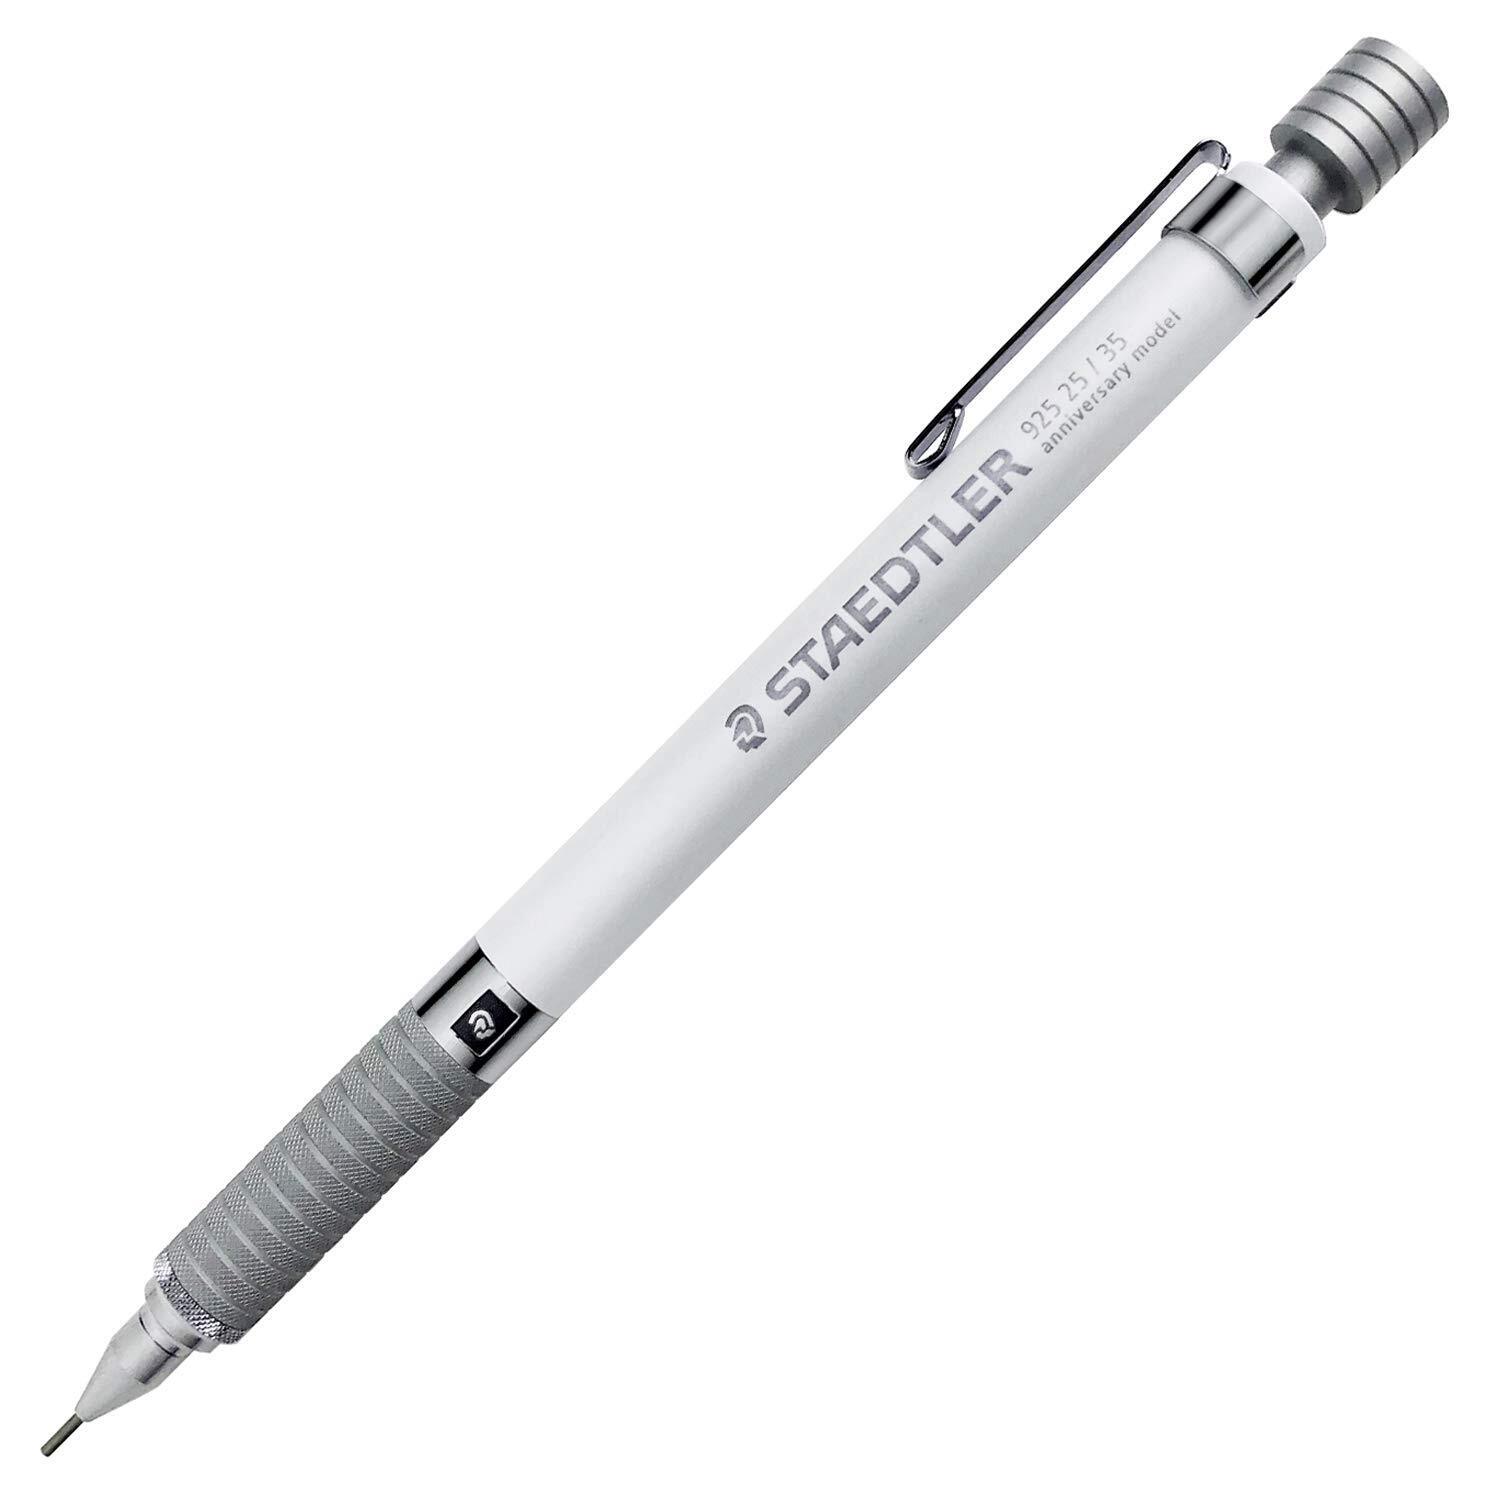 Staedtler Mechanical Pencil 0.5mm for Drafting 30th Anniversary